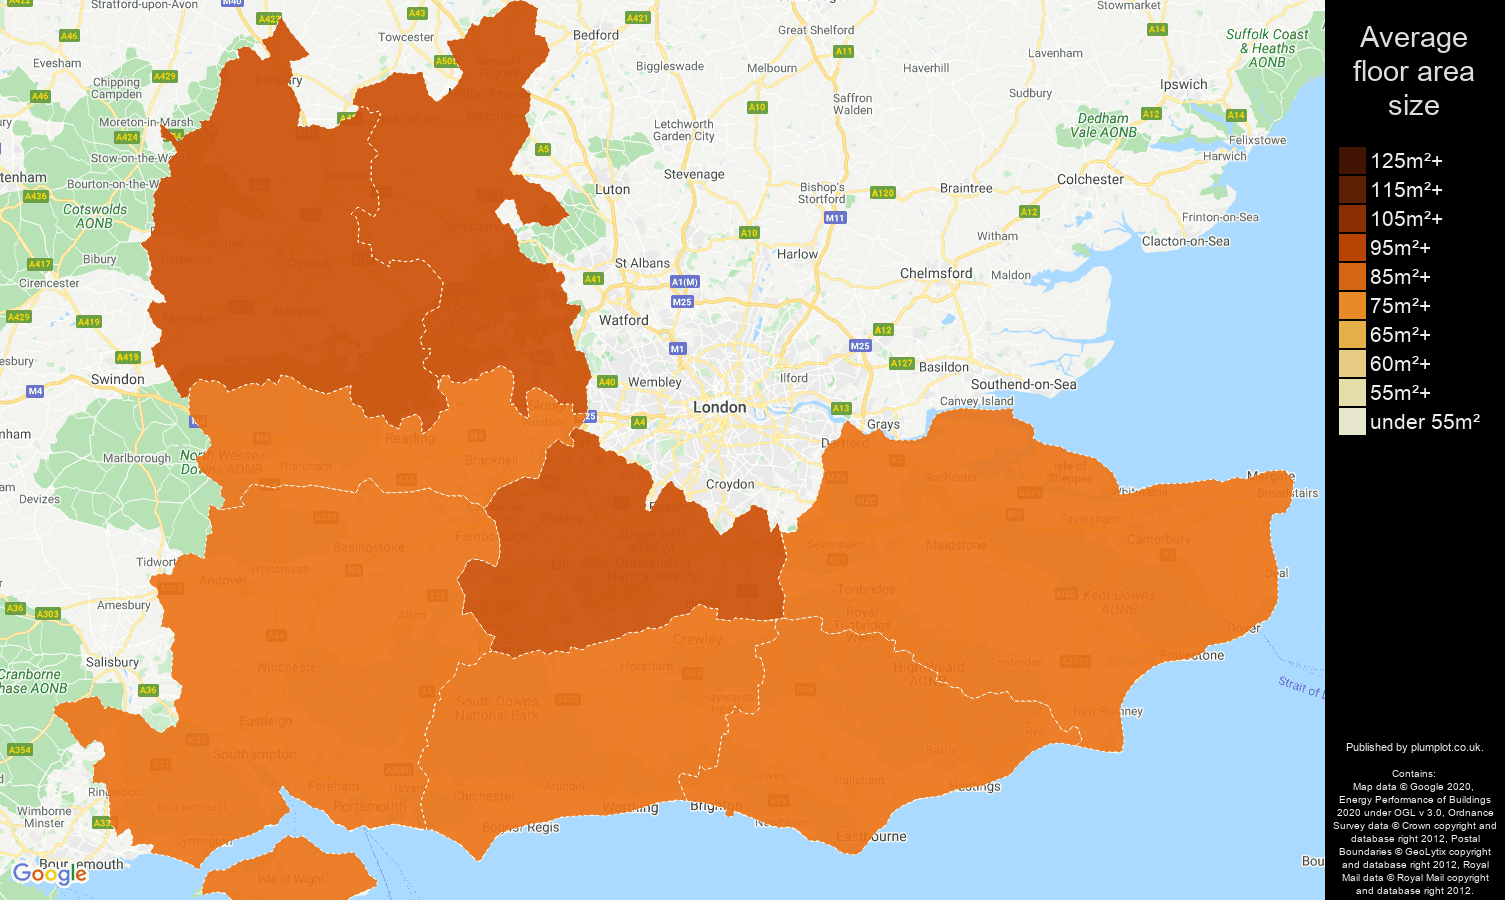 South East map of average floor area size of properties